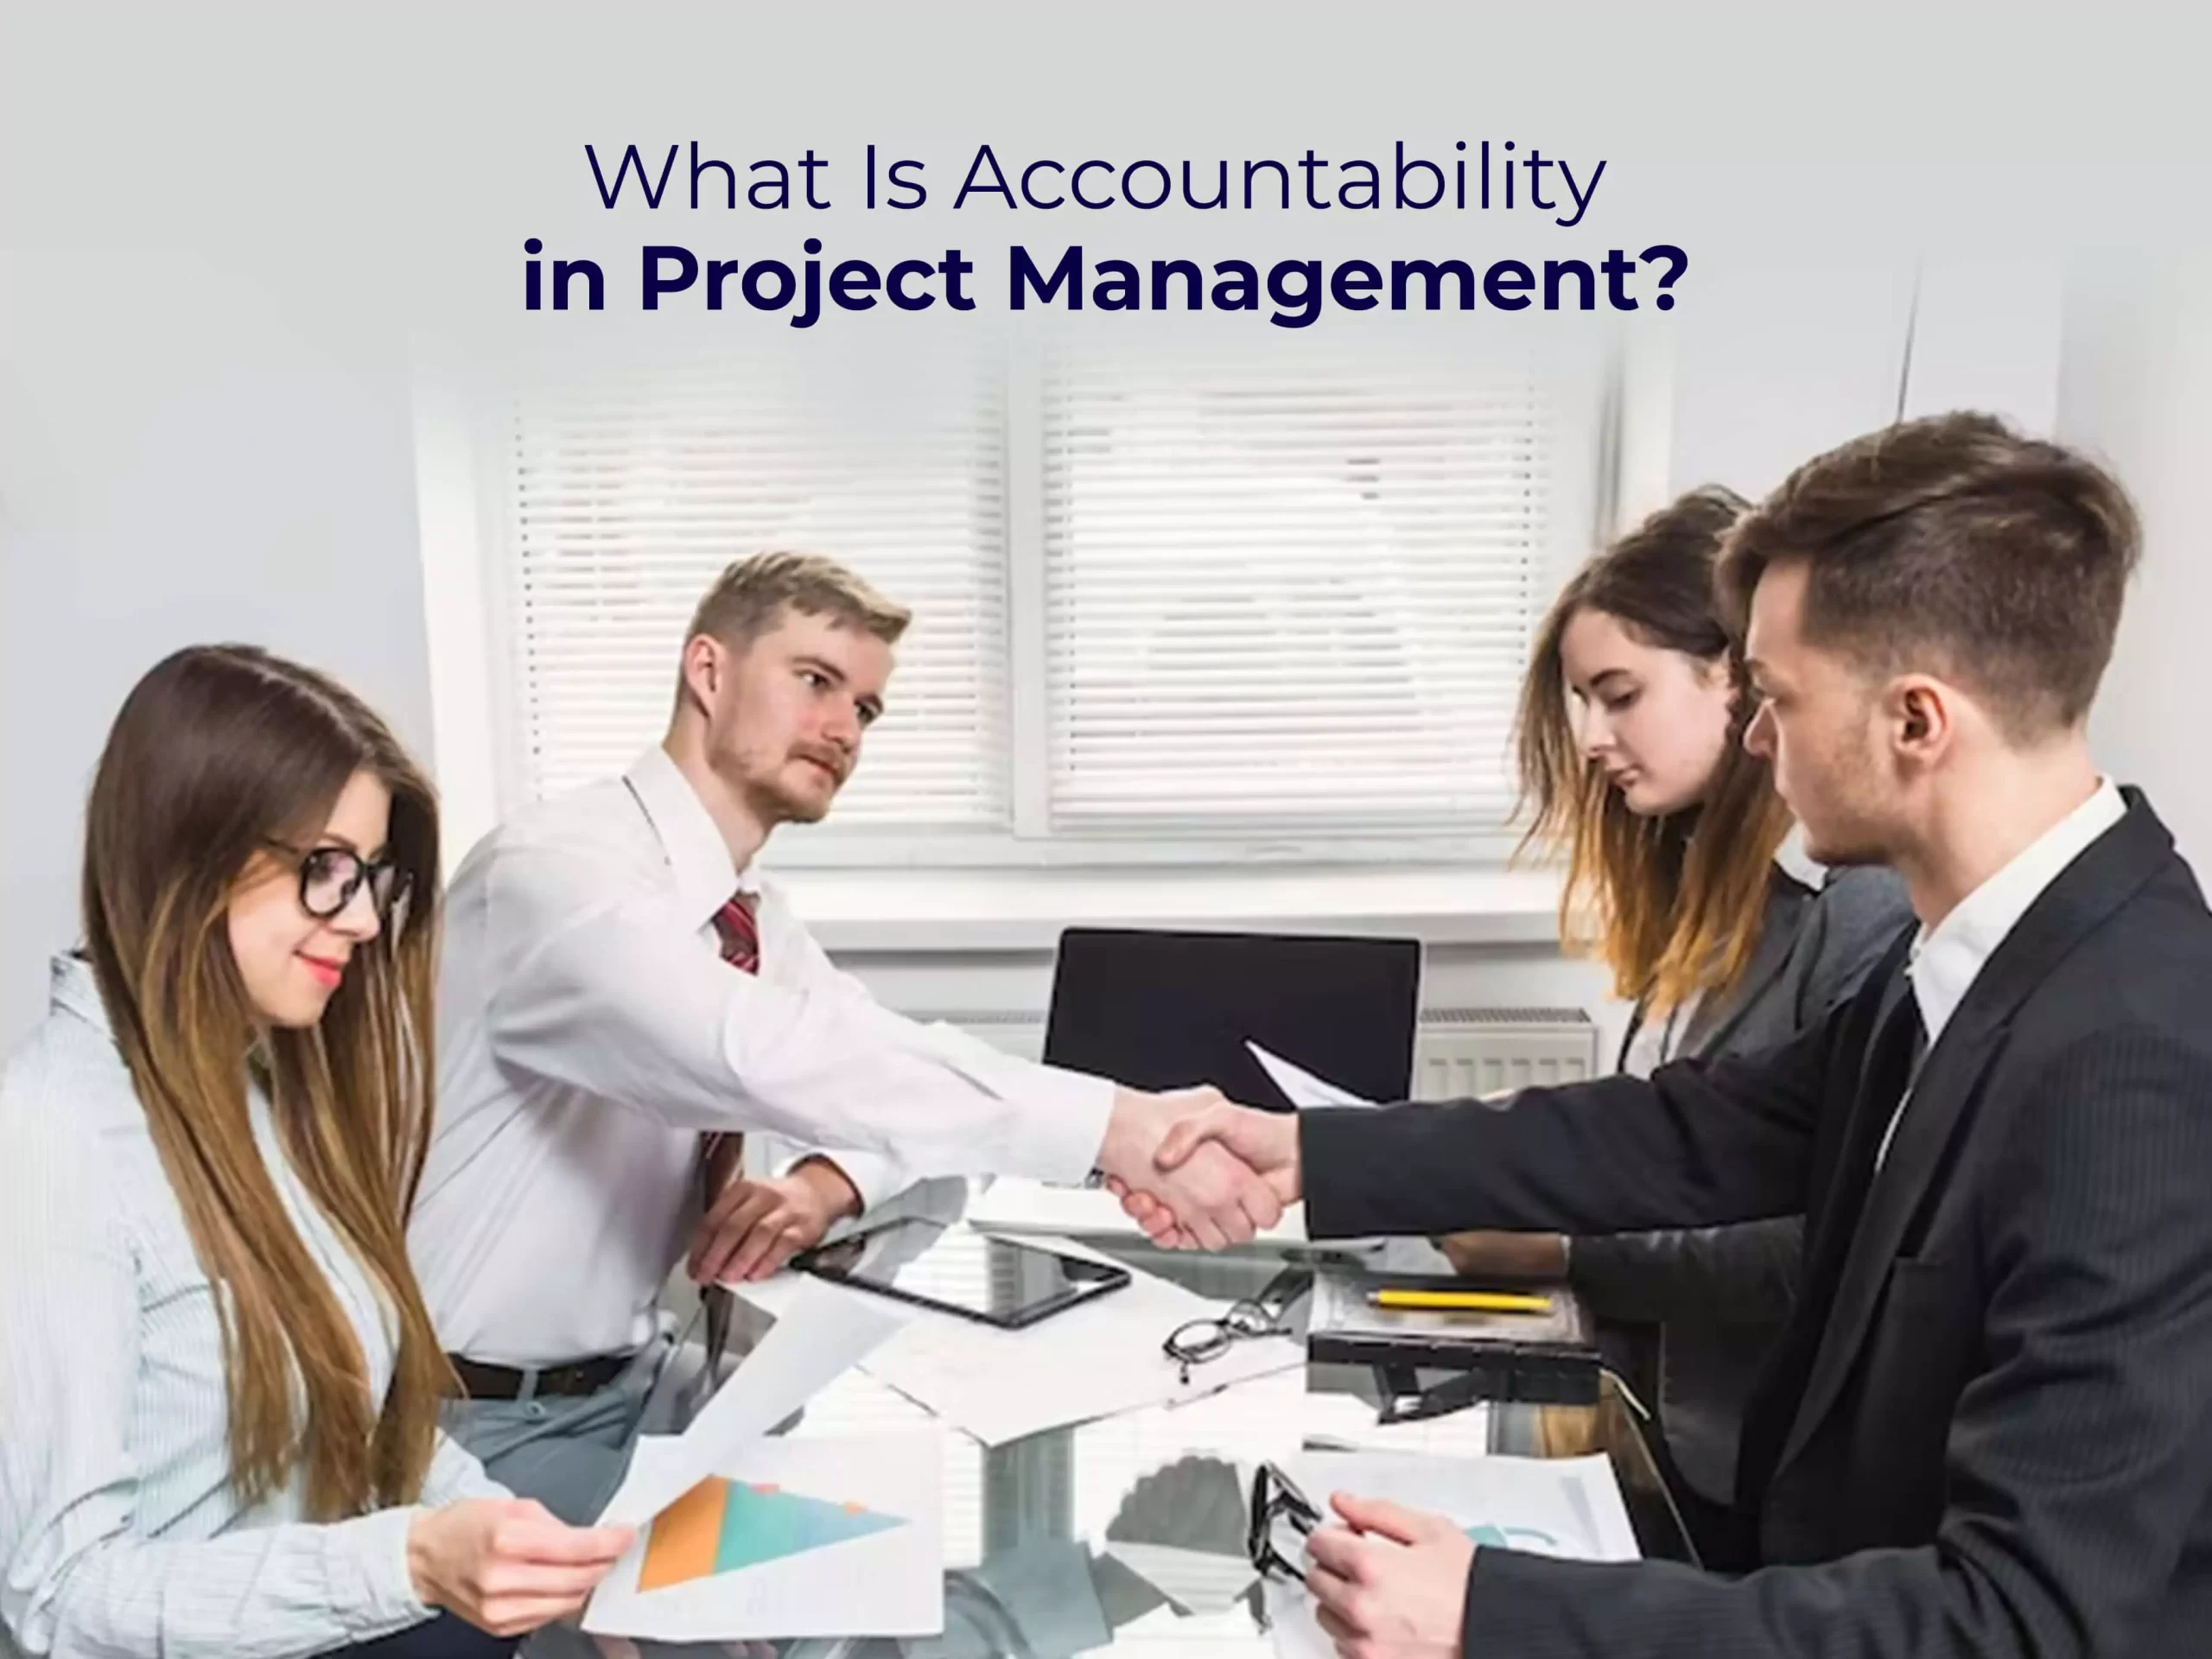 What Is Accountability in Project Management?